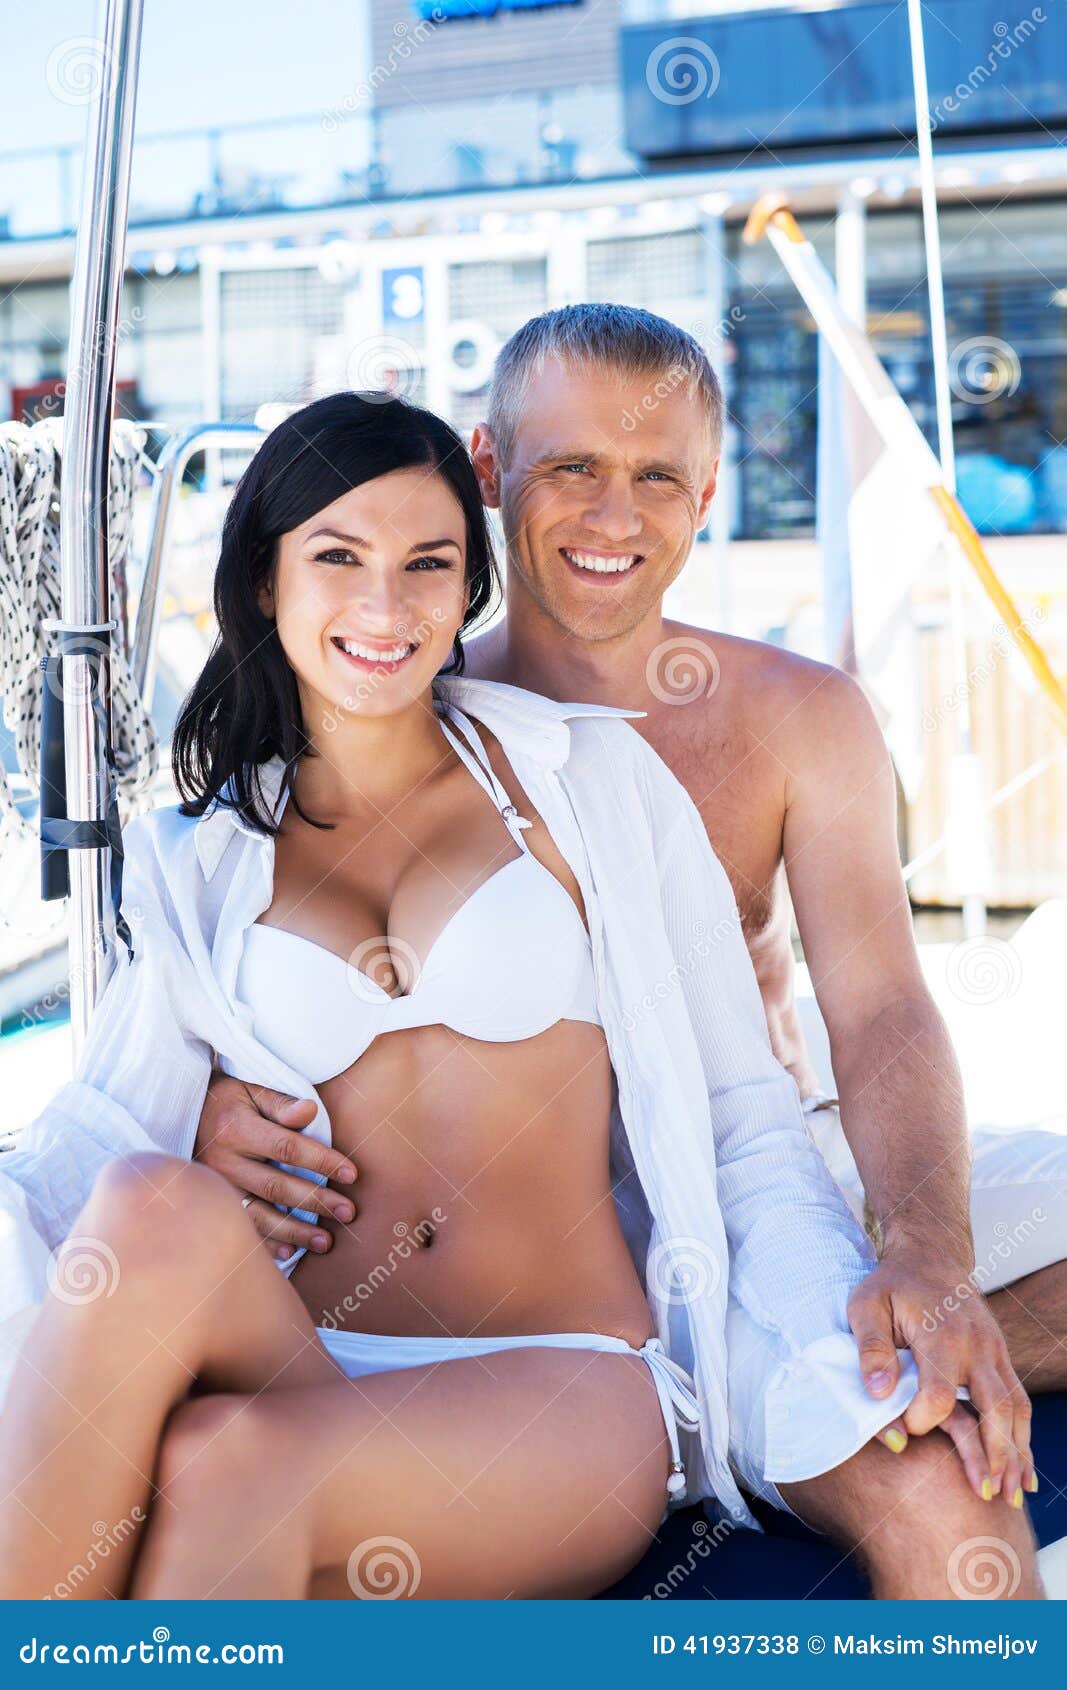 Discover the advantages of dating rich women for